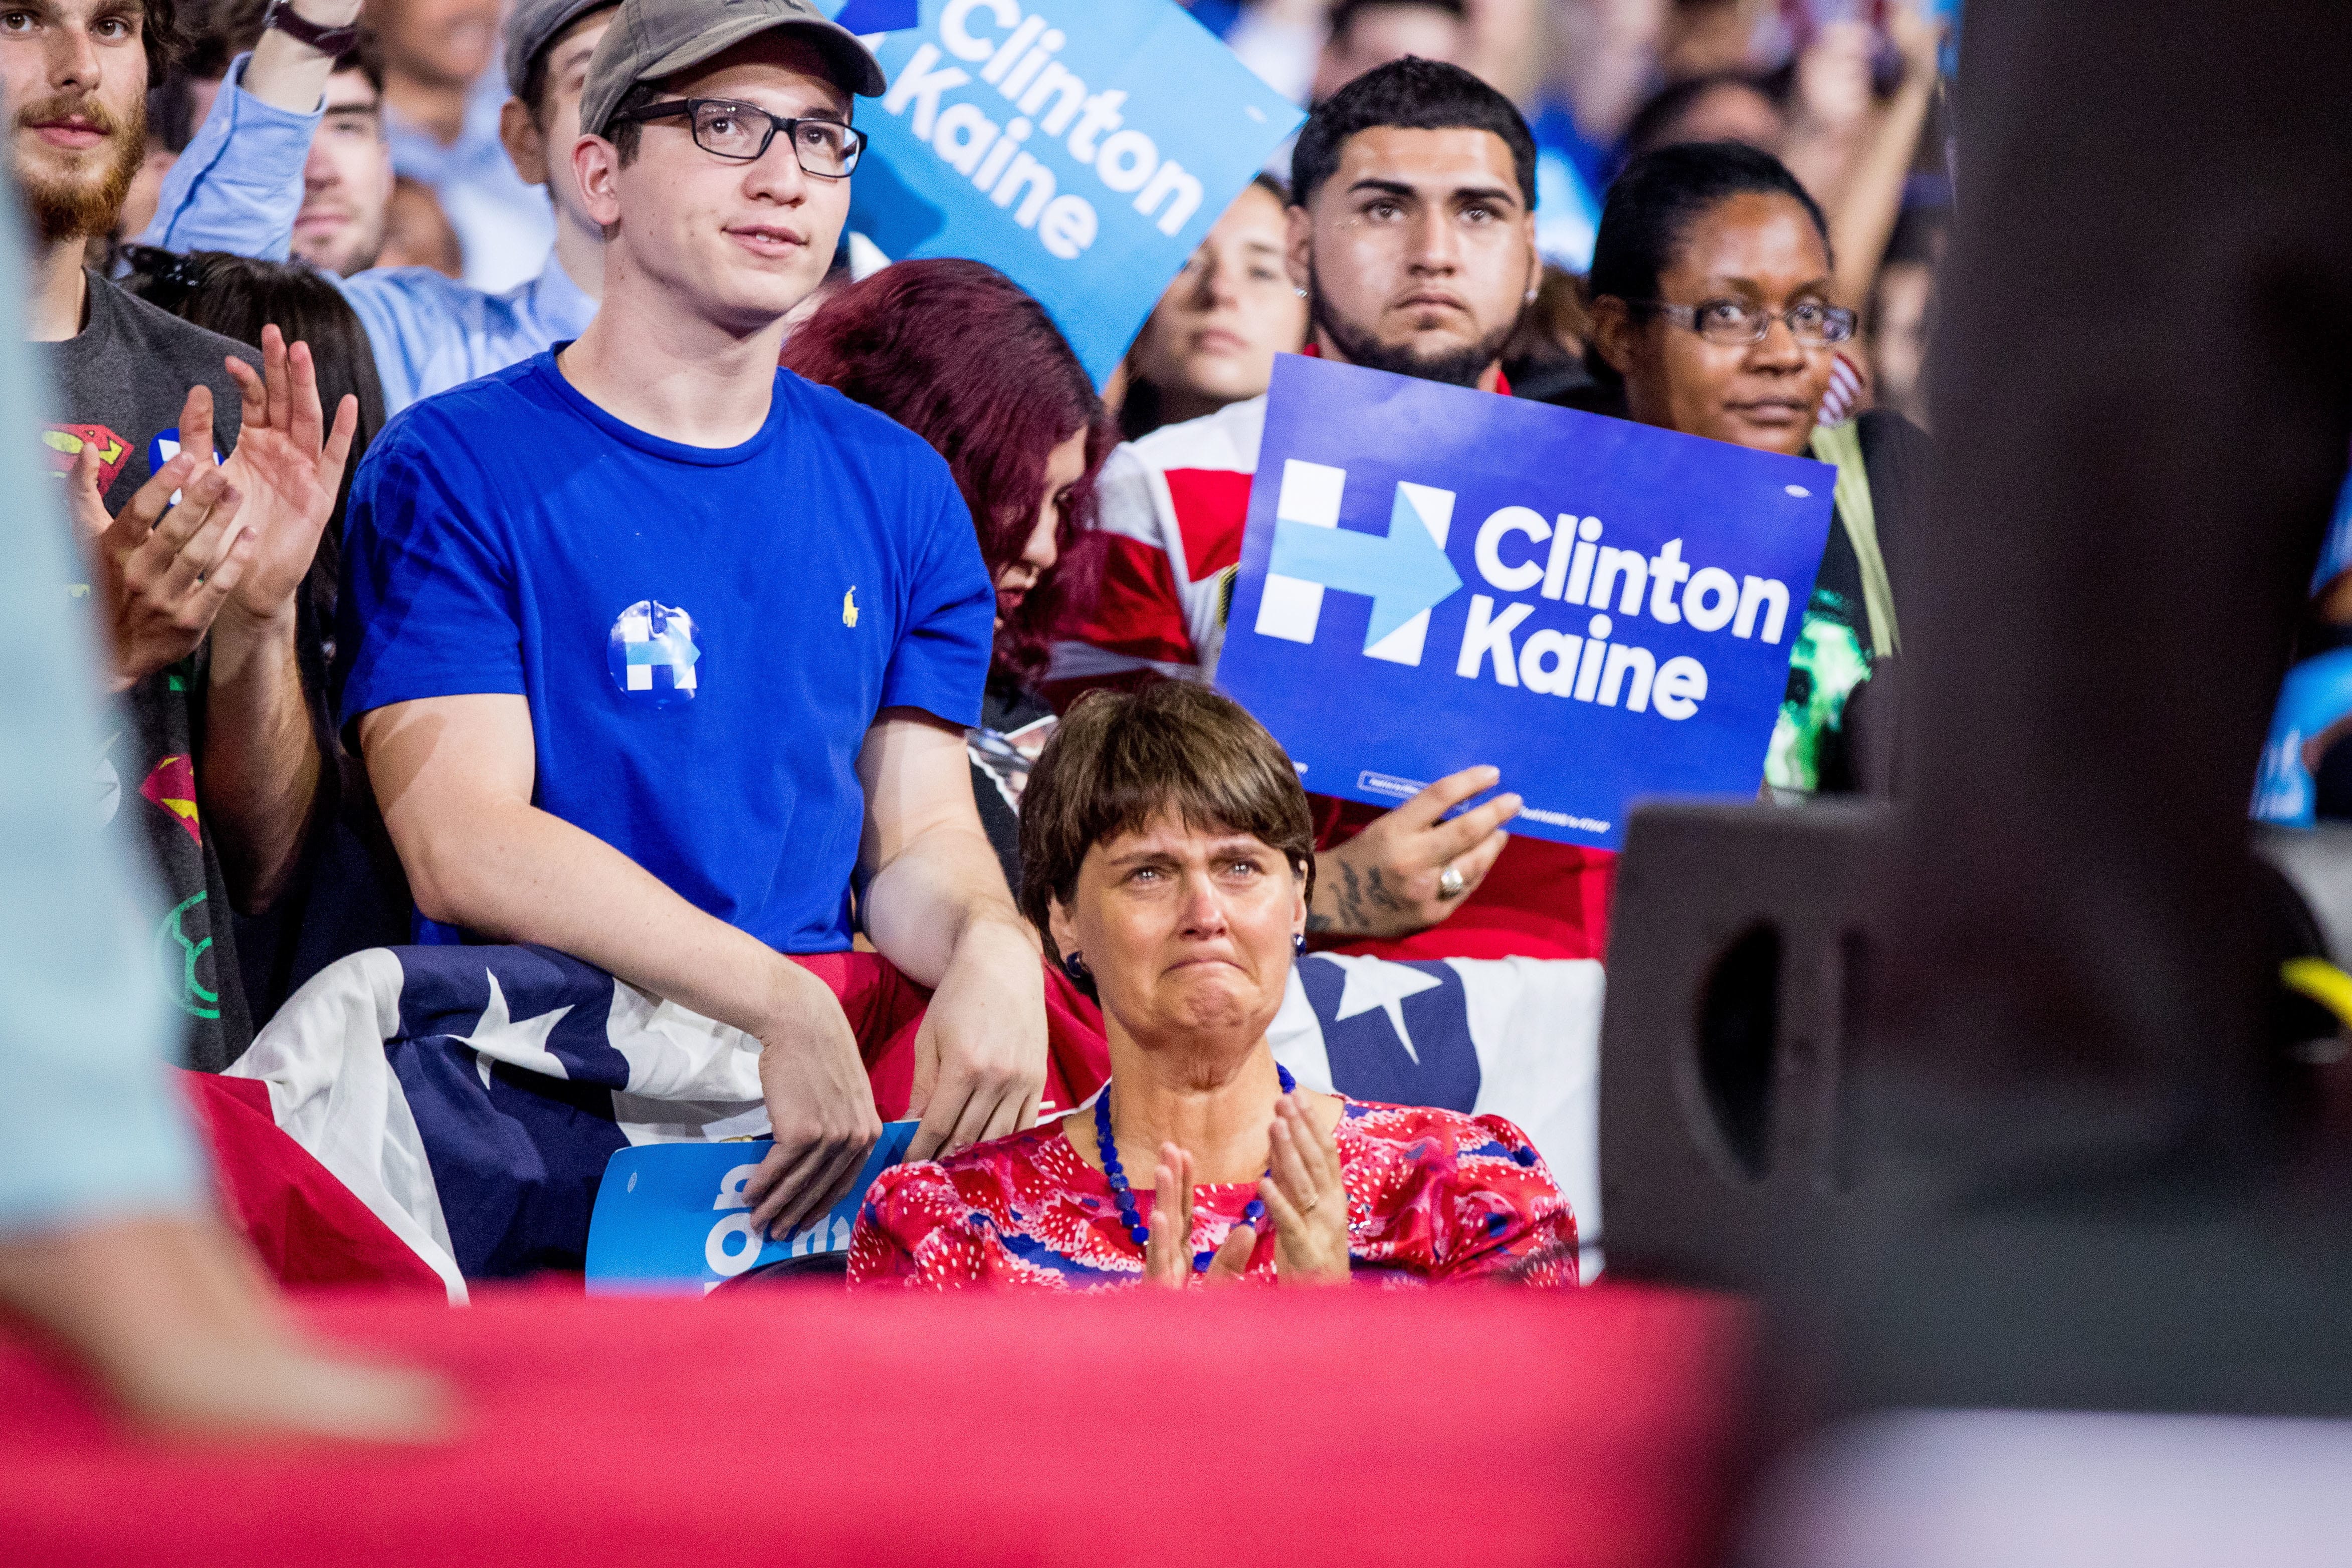 Anne Holton, center, the wife of Sen. Tim Kaine, D-Va., becomes emotional as Kaine tells the audience that their son will be deployed to Europe as a Marine as he speaks at a rally with Democratic presidential candidate Hillary Clinton at Florida International University Panther Arena in Miami, Saturday, July 23, 2016. Clinton has chosen Kaine to be her running mate.